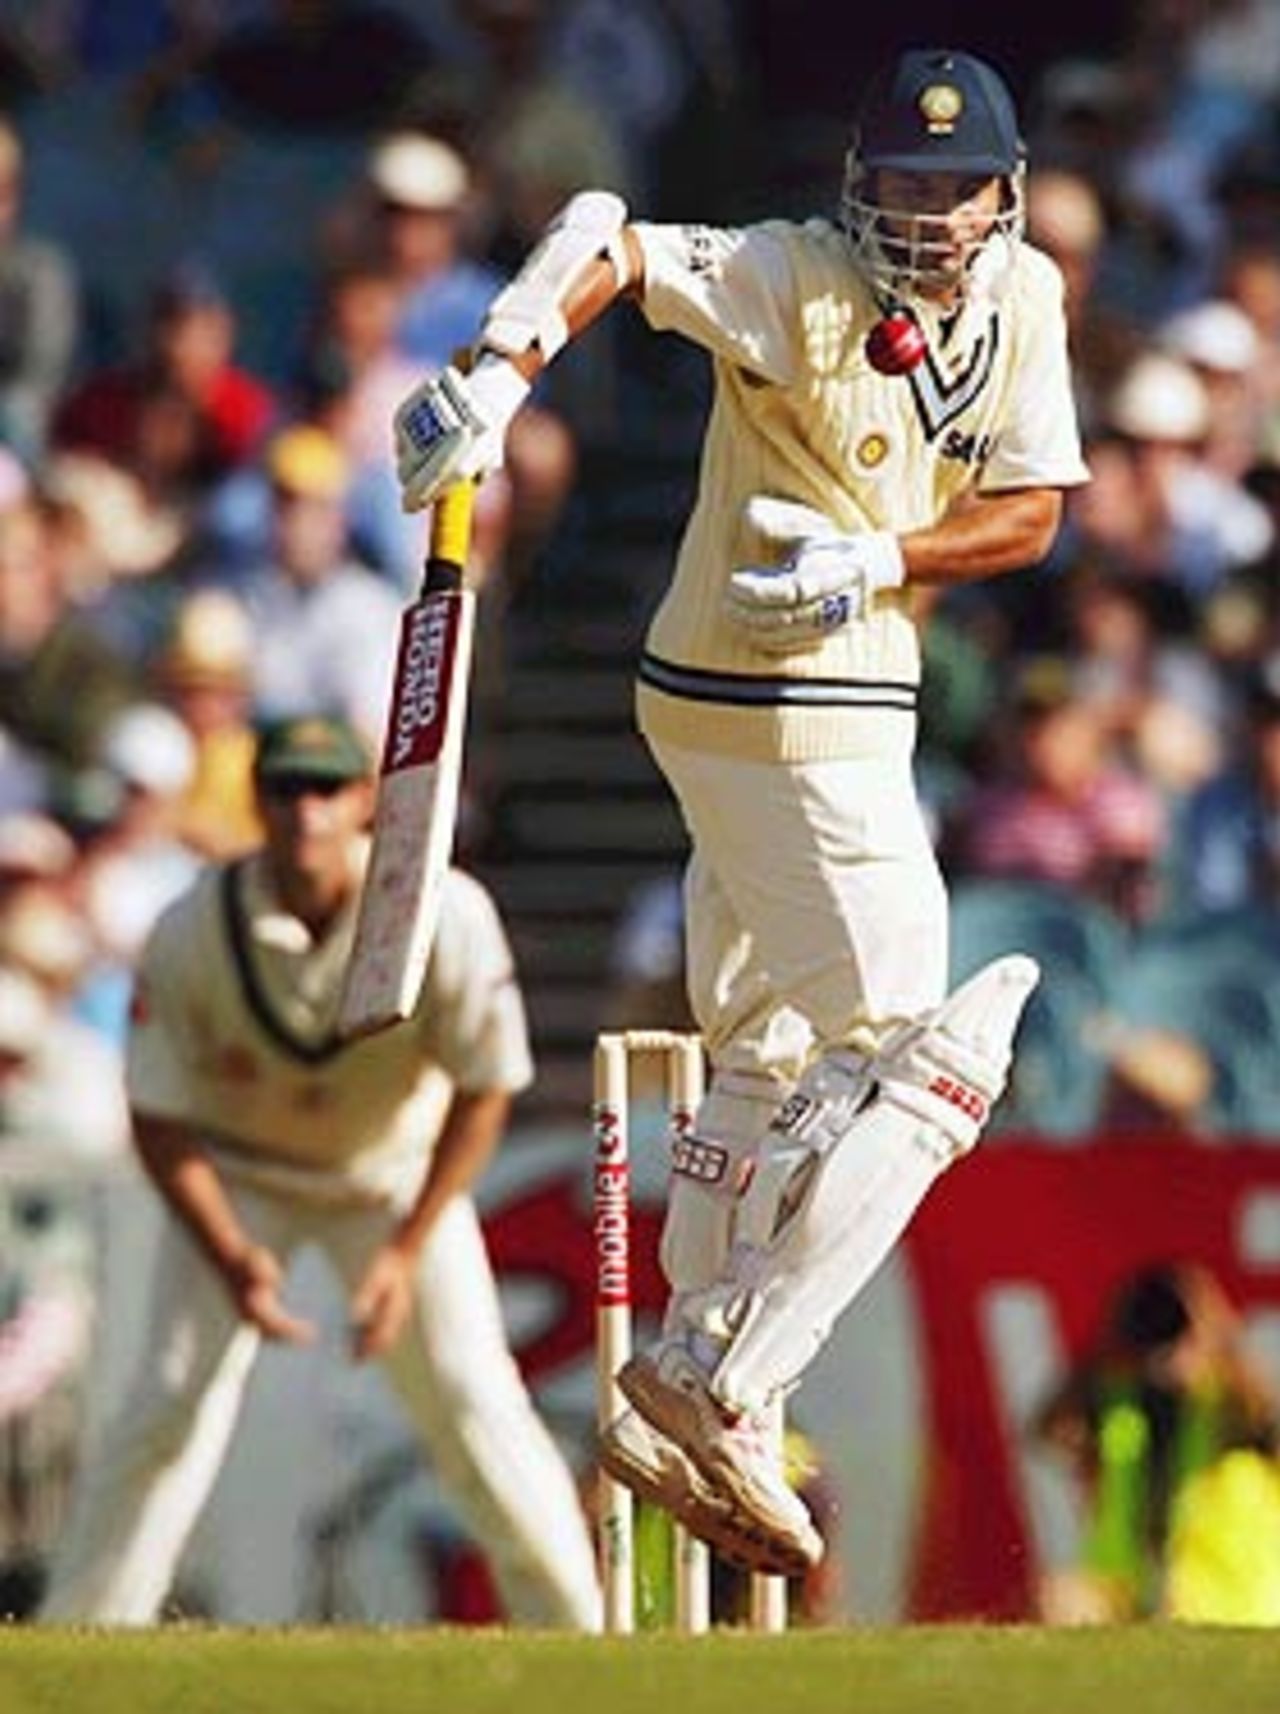 Sourav Ganguly is made to hop, as he fends off a snorter from Brett Lee, Australia v India, 3rd Test, Melbourne, 1st day, December 26, 2003